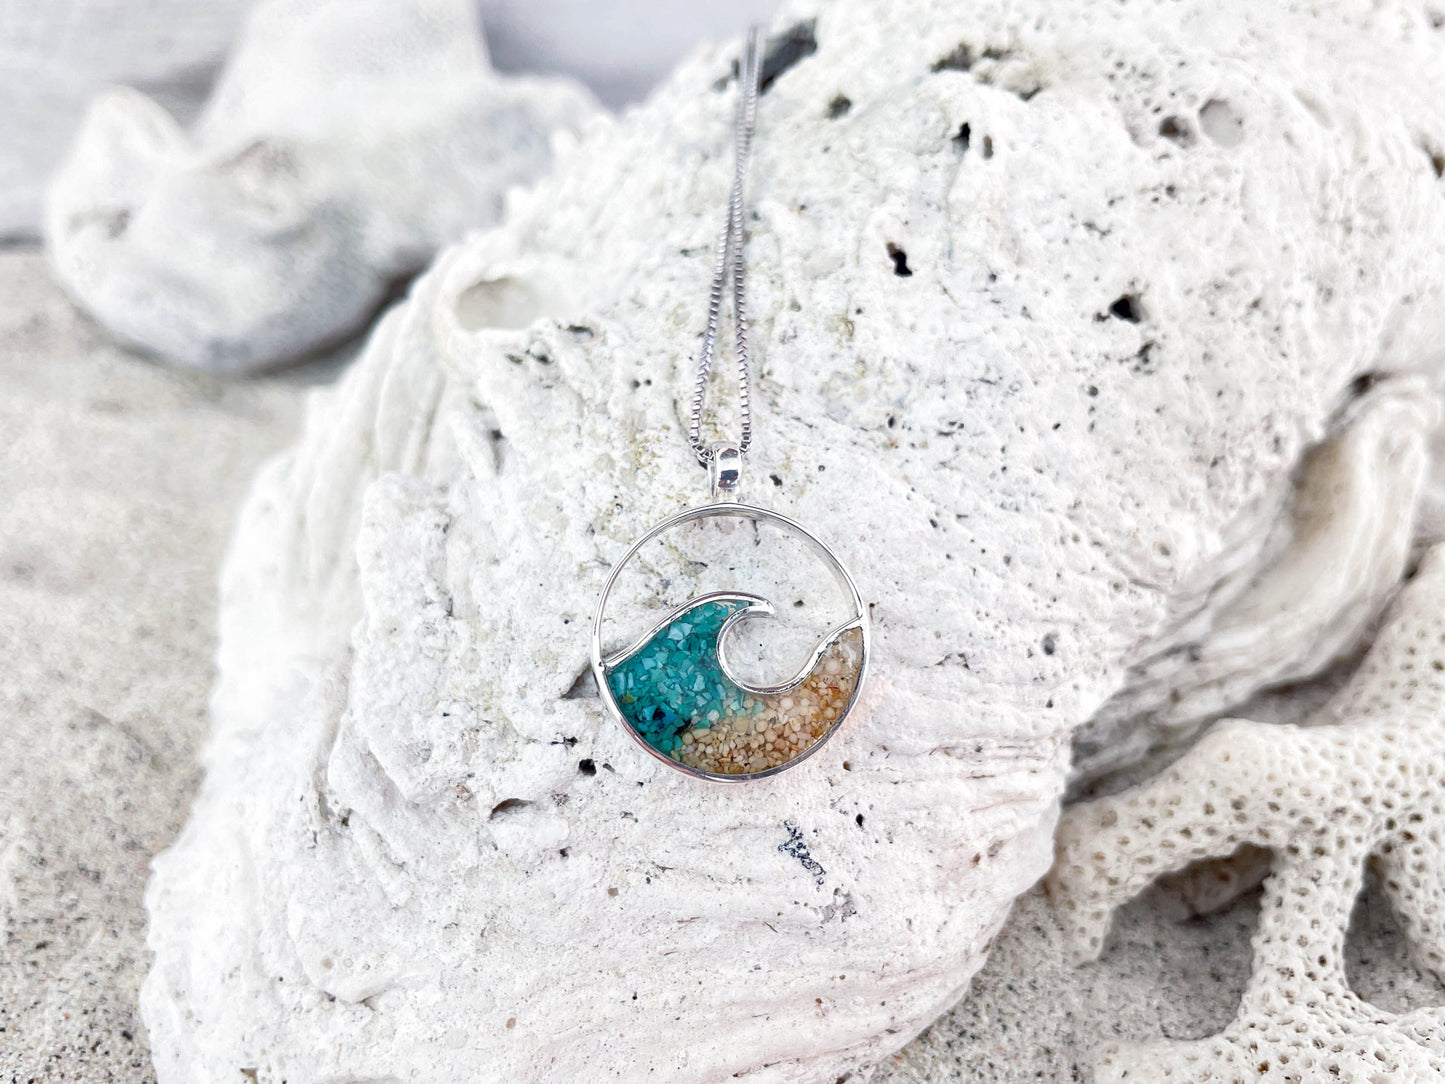 I Miss Bali Sand Jewellery, Rolling Wave Sand Pendant Necklace Handmade in Bali, front view